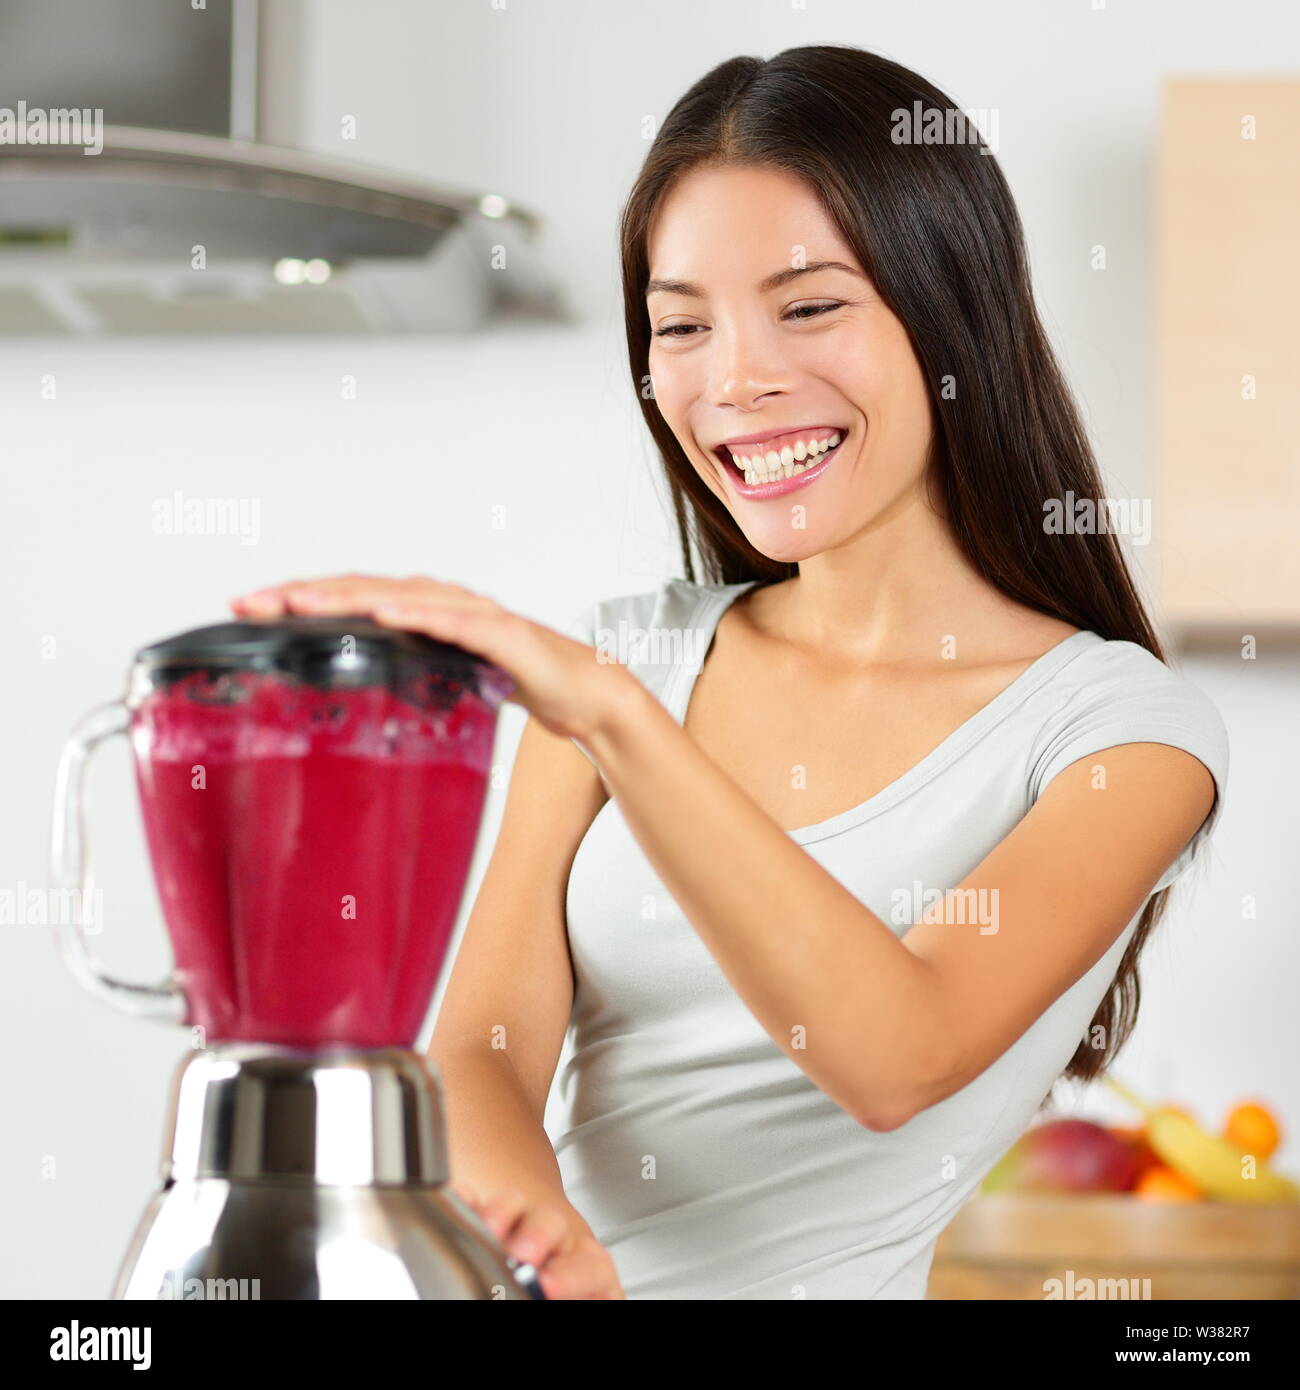 Smoothie woman blending healthy beet - fruit juice. Asian young adult using home appliance kitchen blender to make vegan organic vegetable smoothie using raw ingredients for diet. Stock Photo